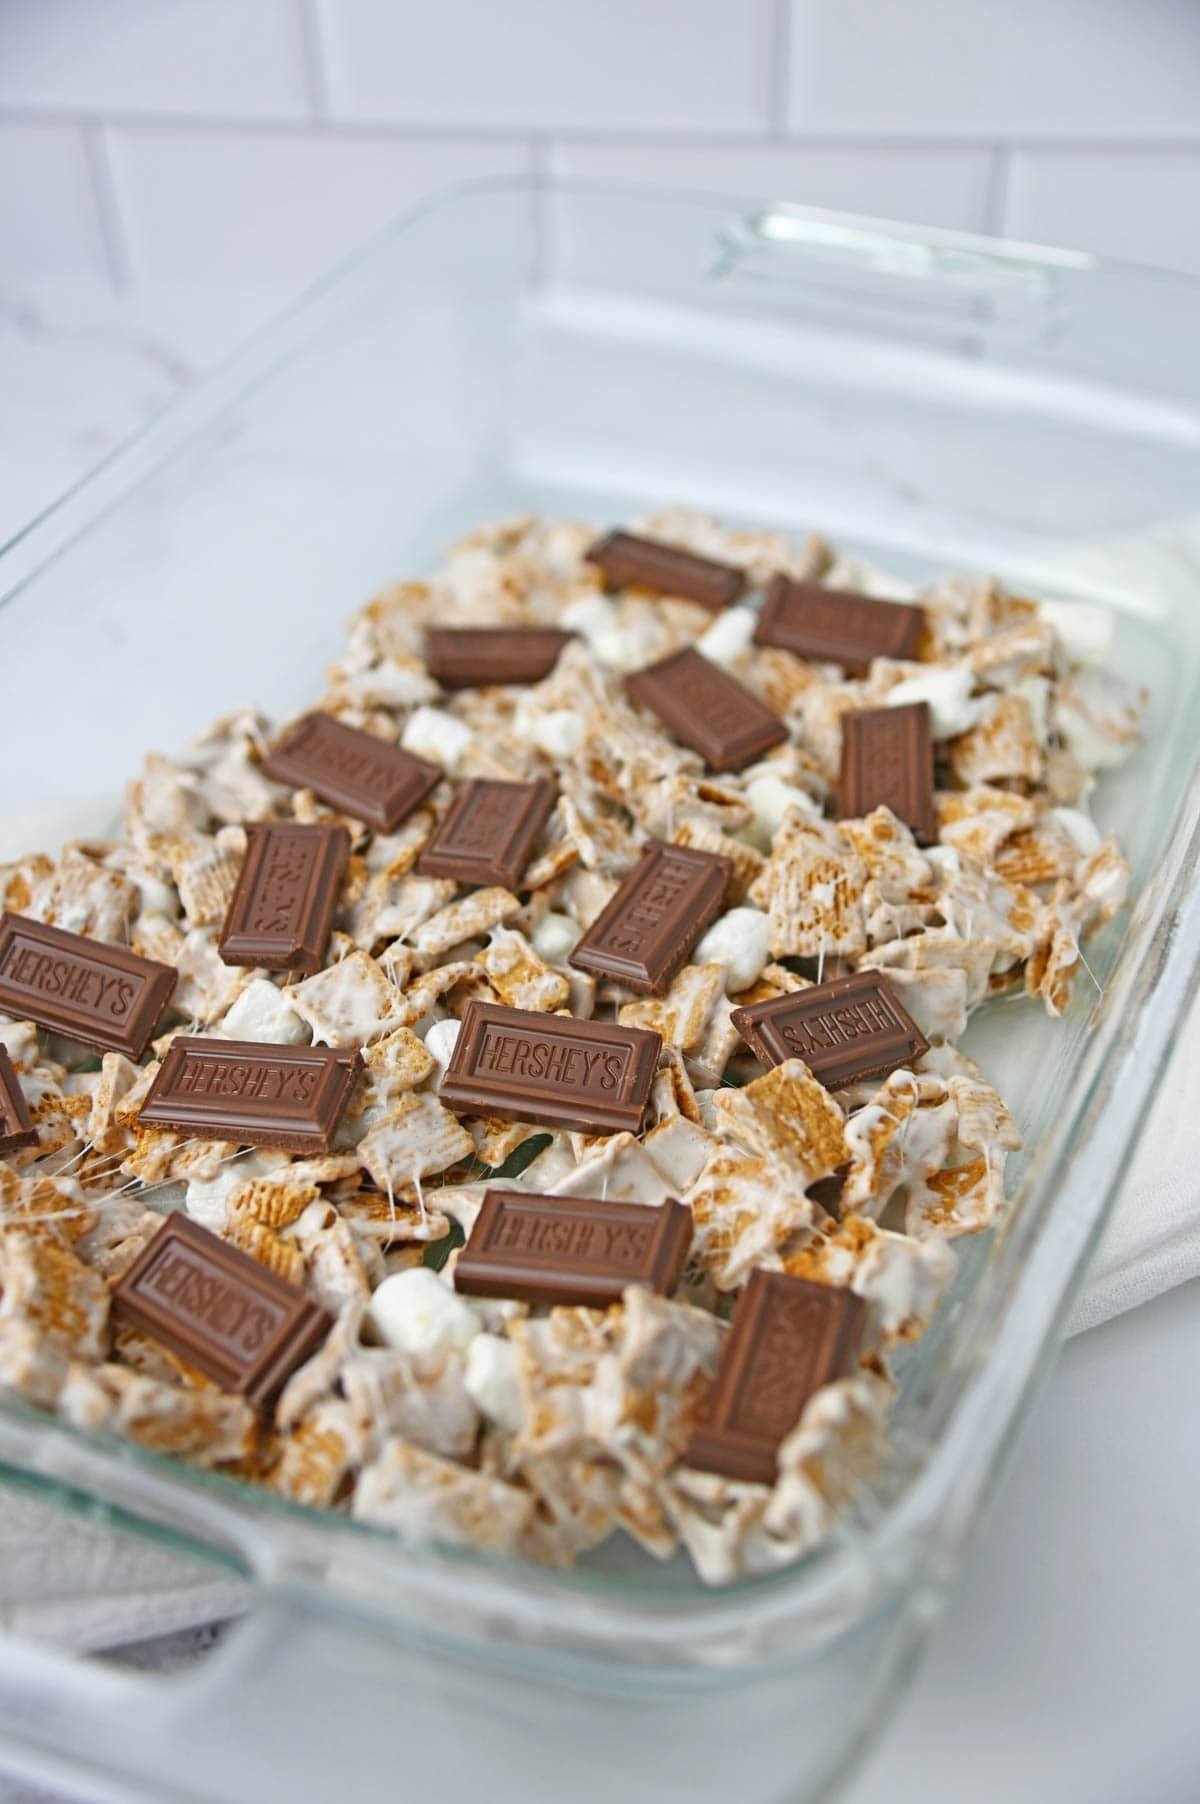 Golden grahams mixture topped with chocolate squares